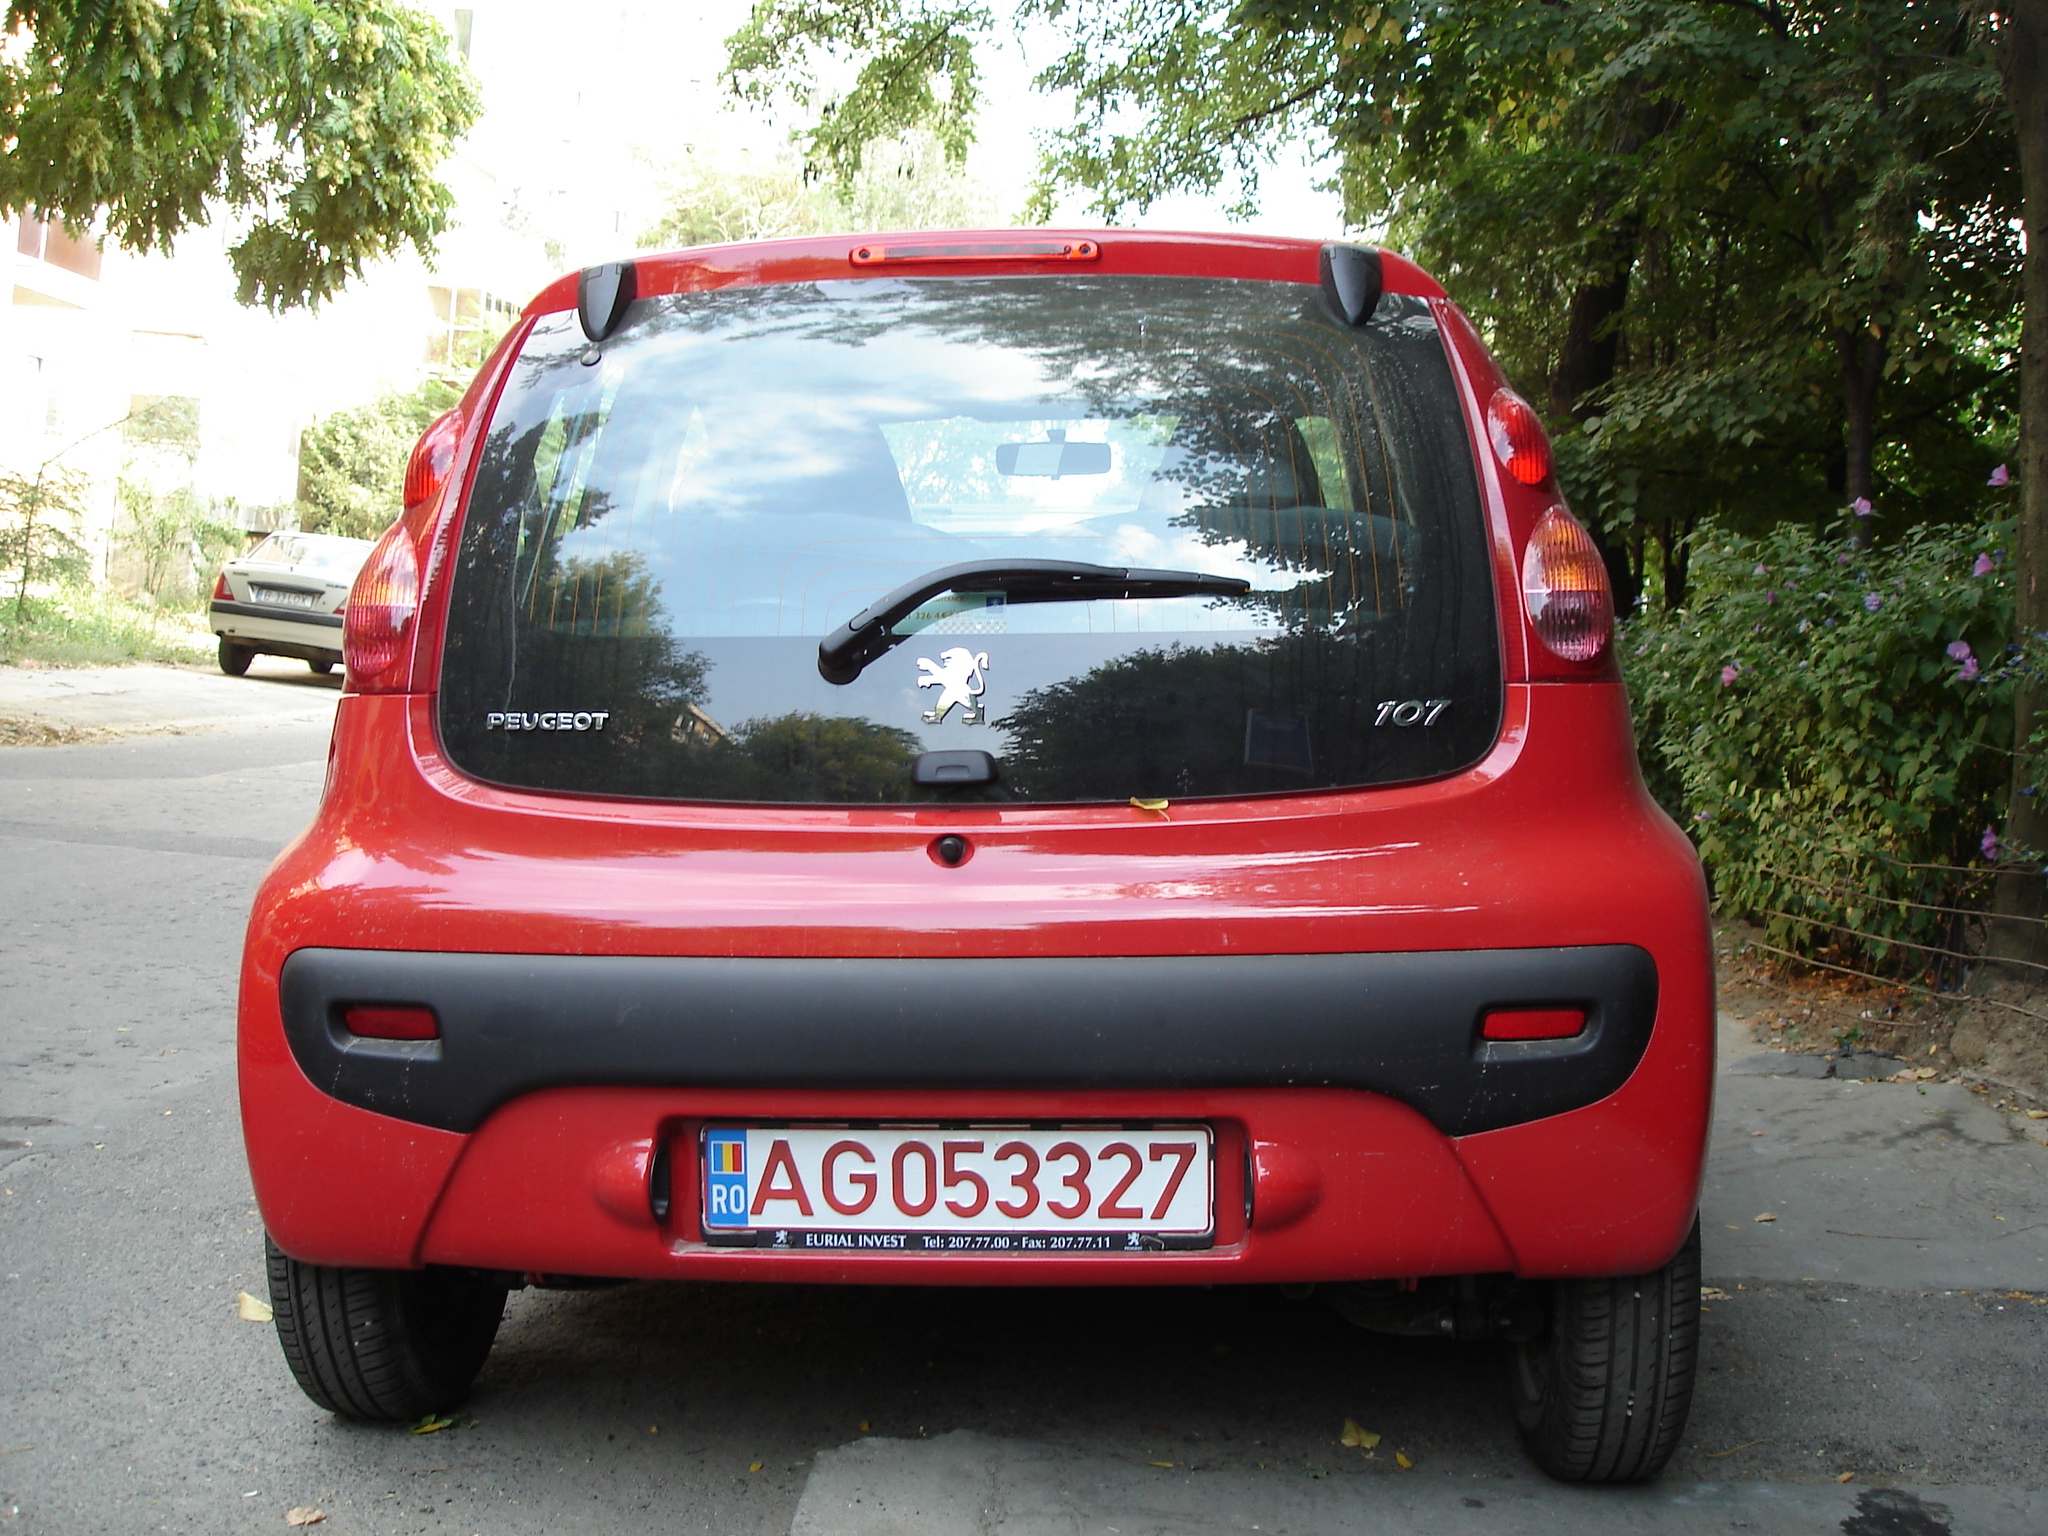 https://upload.wikimedia.org/wikipedia/commons/a/a4/Peugeot_107_red_back.jpg